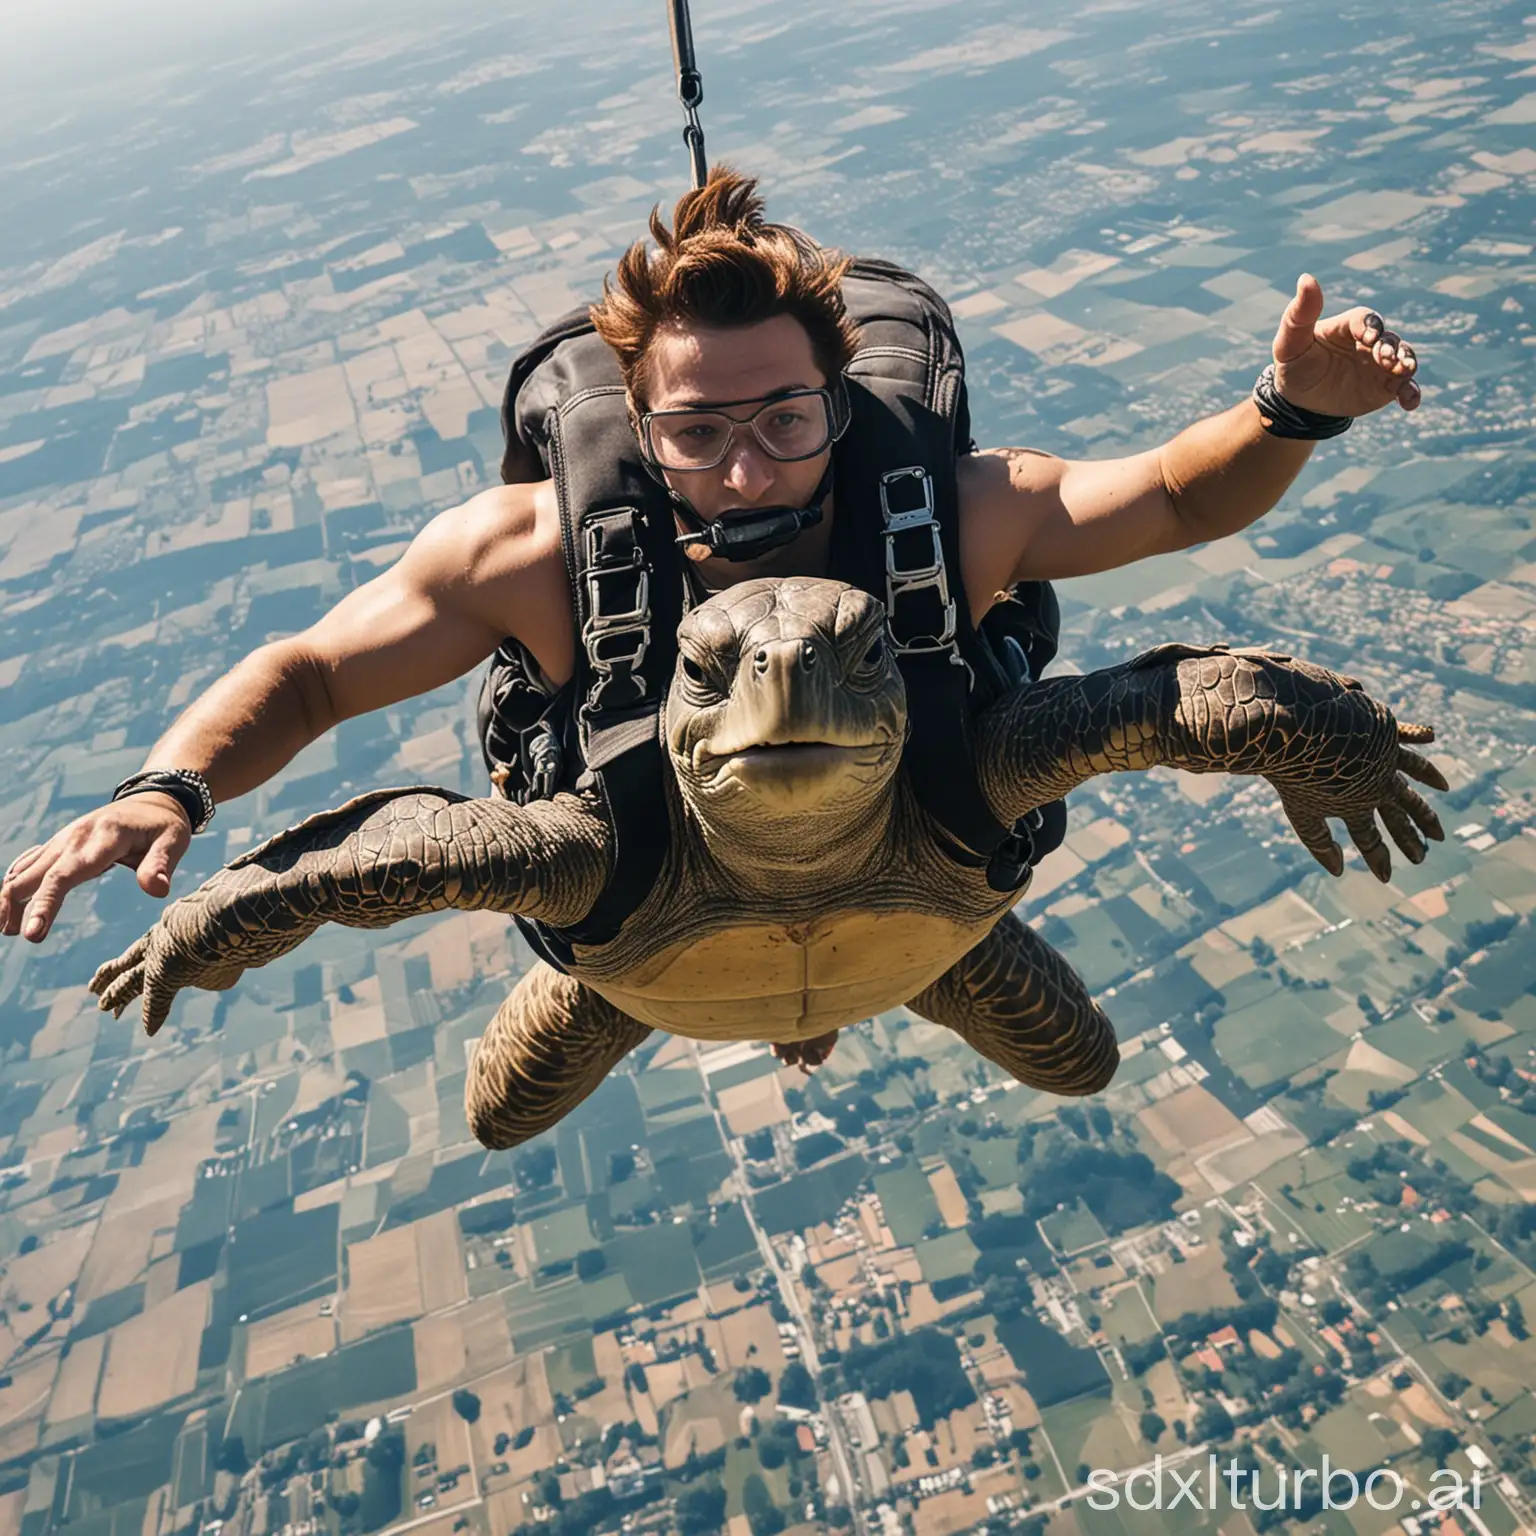 A human and a turtle make a skydive together